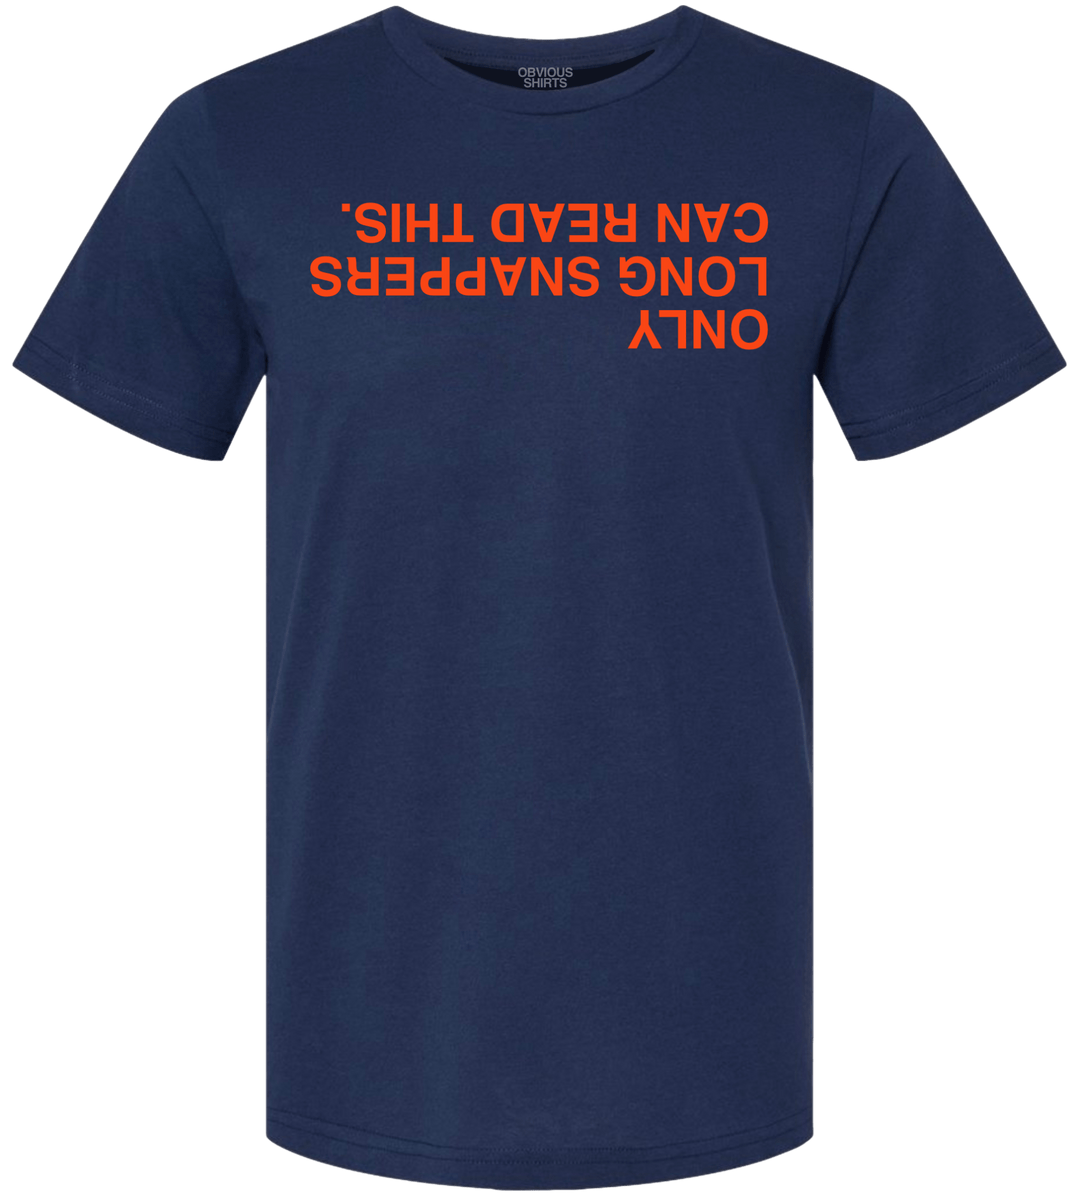 ONLY LONG SNAPPERS CAN READ THIS. (NAVY/ORANGE) - OBVIOUS SHIRTS